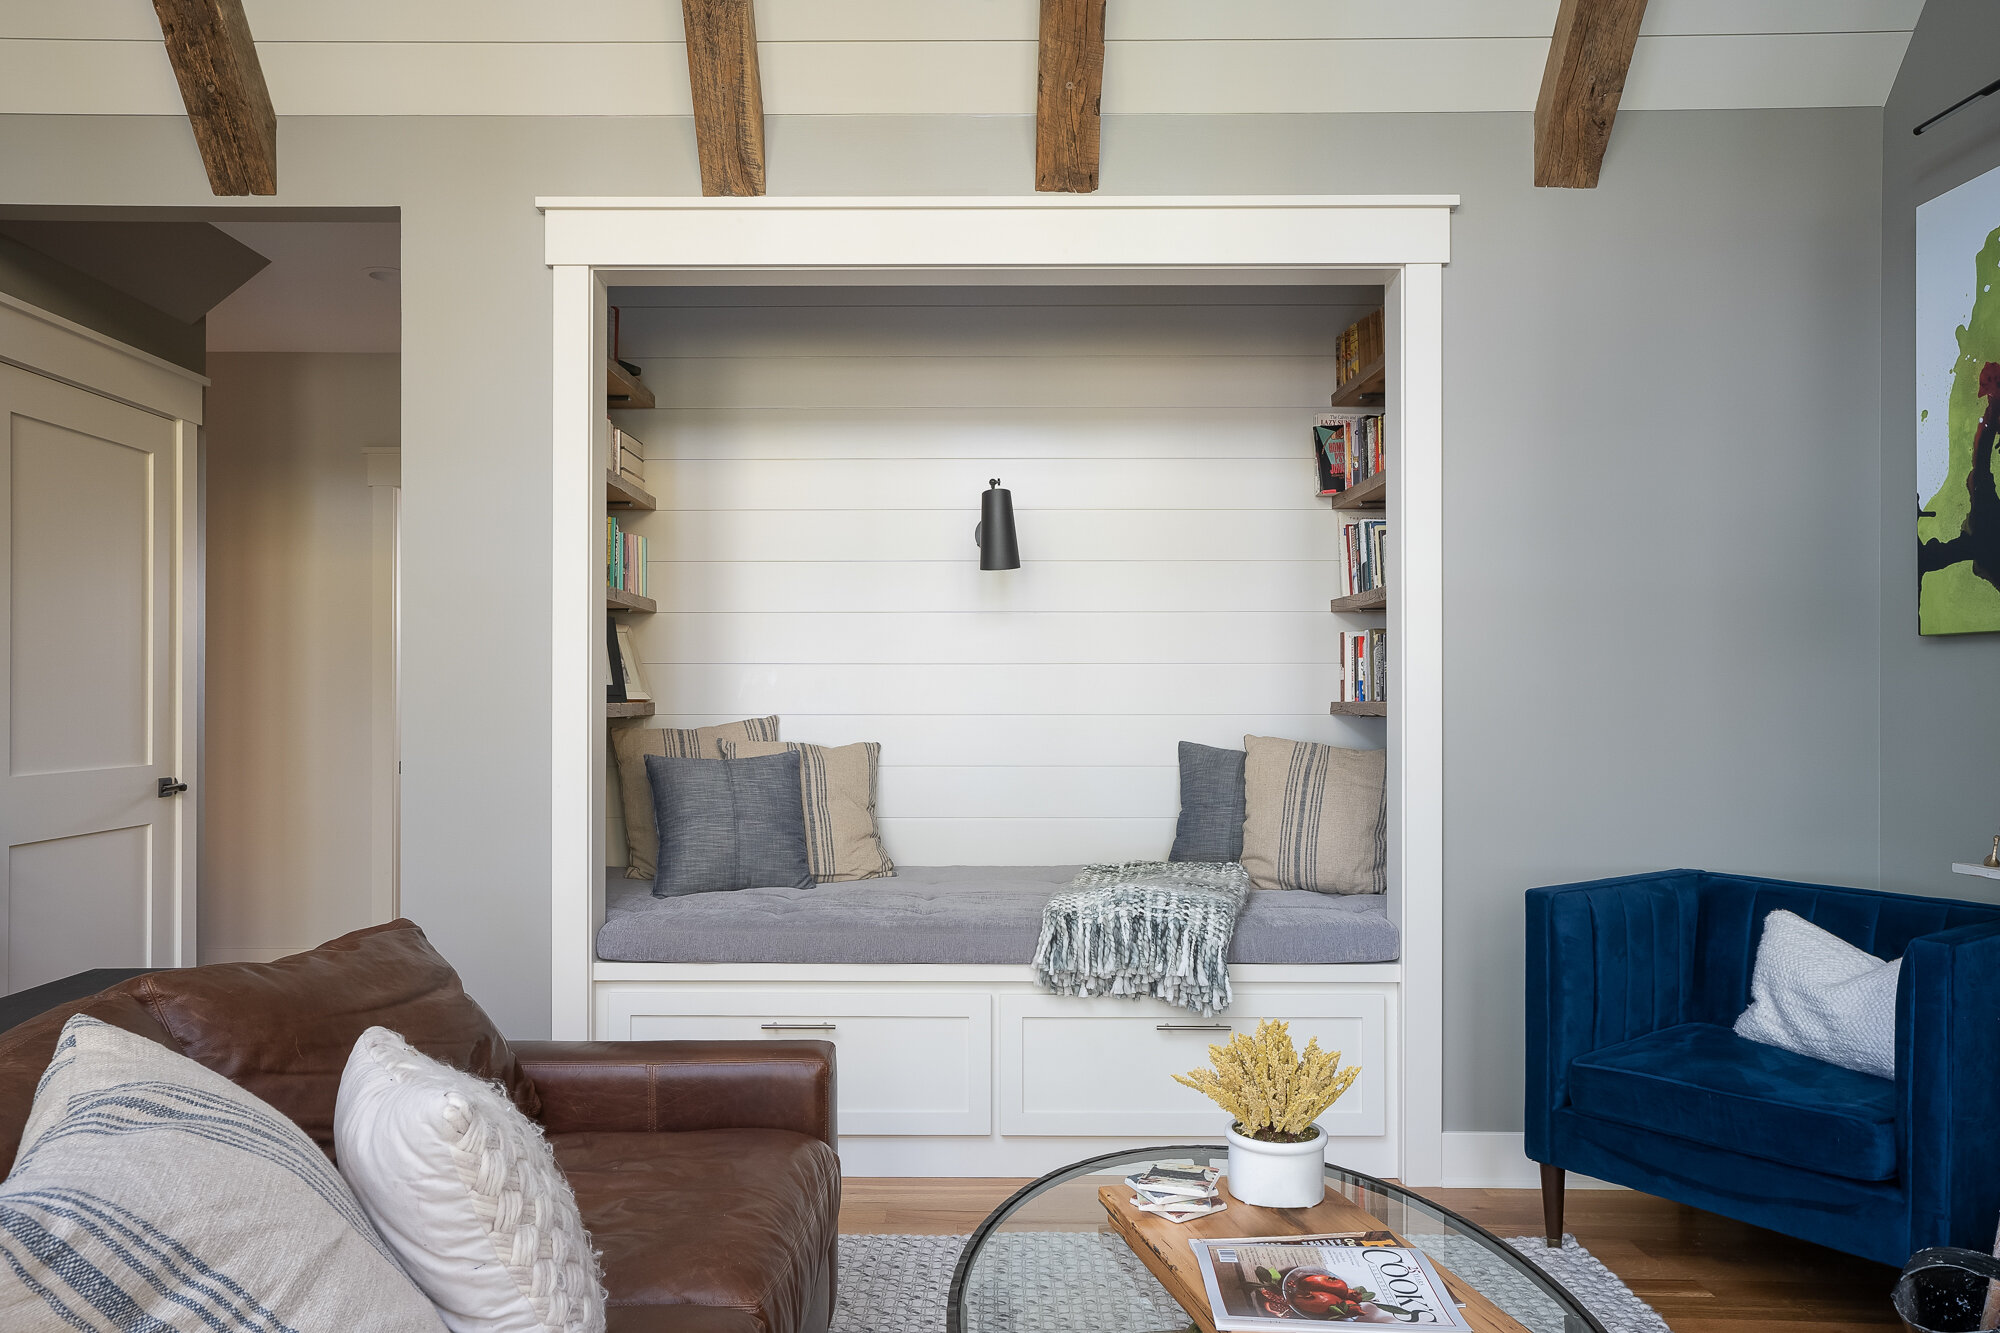 Architectural photography of a reading nook built into living room wall